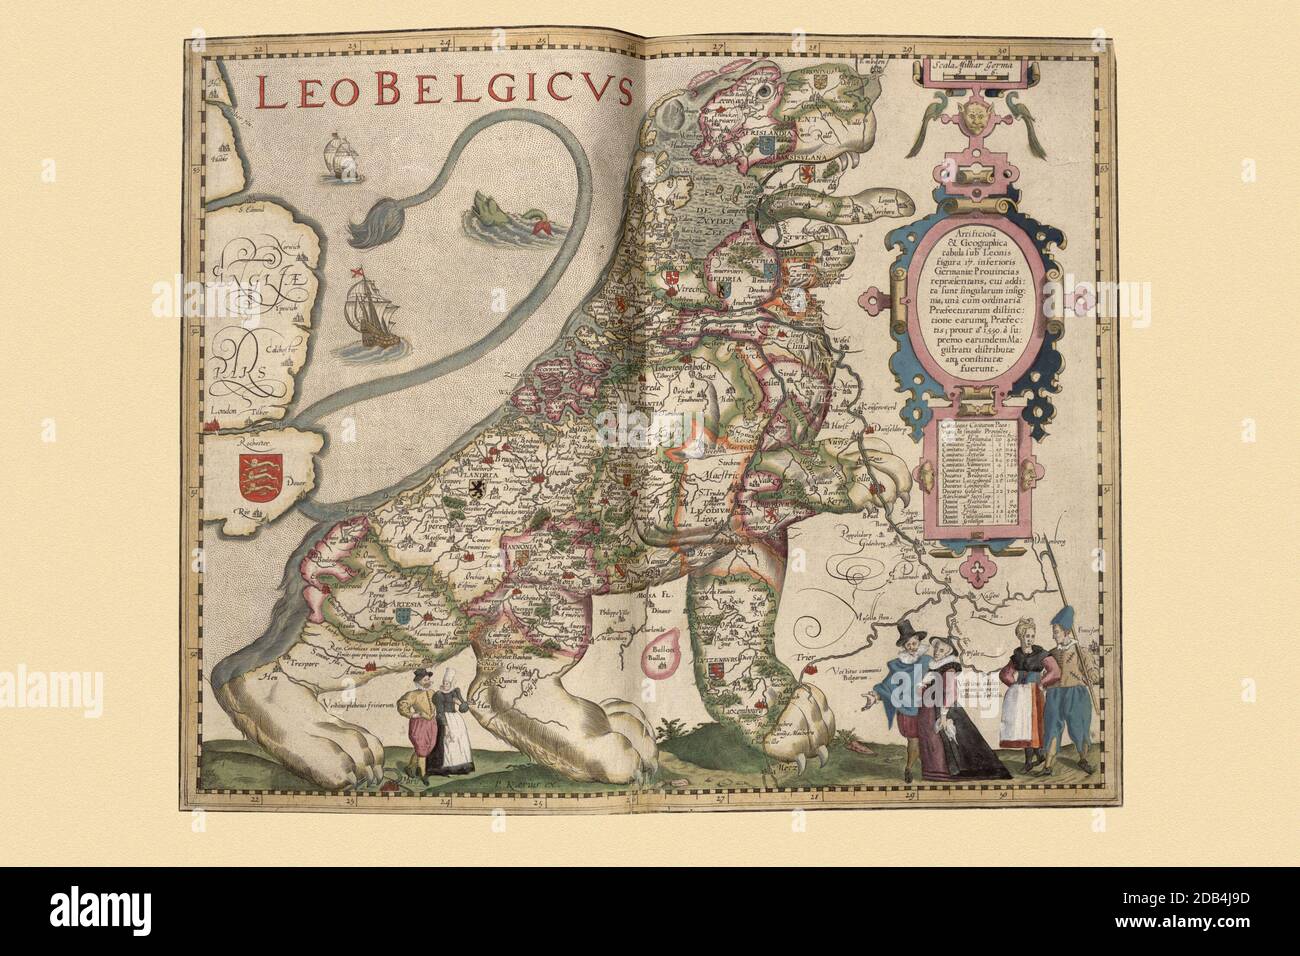 'The Leo Belgicus, Latin for Netherlandic Lion is a map of the Low Countries drawn in the shape of a lion. The earliest Leo Belgicus was drawn by the Austrian cartographer Michael Aitzinger in 1583, when the Netherlands were fighting the Eighty Years' War for independence. The motif was inspired by the heraldic figure of the lion, occurring in the coats of arms of several of the Netherlands, namely: Brabant, Flanders, Guelders, Hainout, Holland, Limburg, Luxembourg and Zeeland, as well as in those of William of Orange. Aitzinger's map was the first of many. There were three different designs. Stock Photo